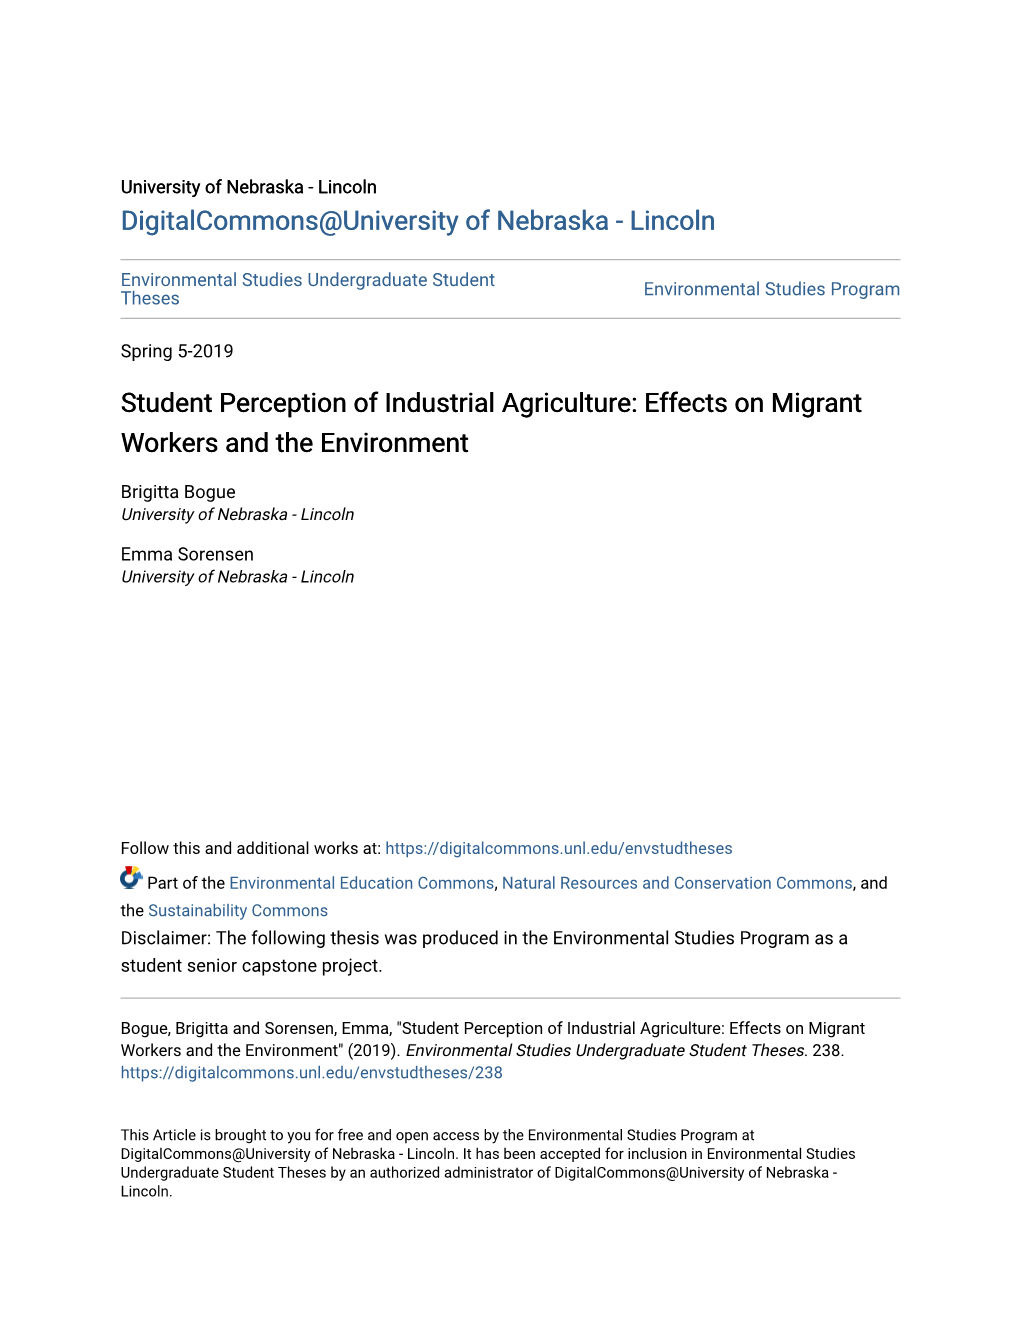 Student Perception of Industrial Agriculture: Effects on Migrant Workers and the Environment